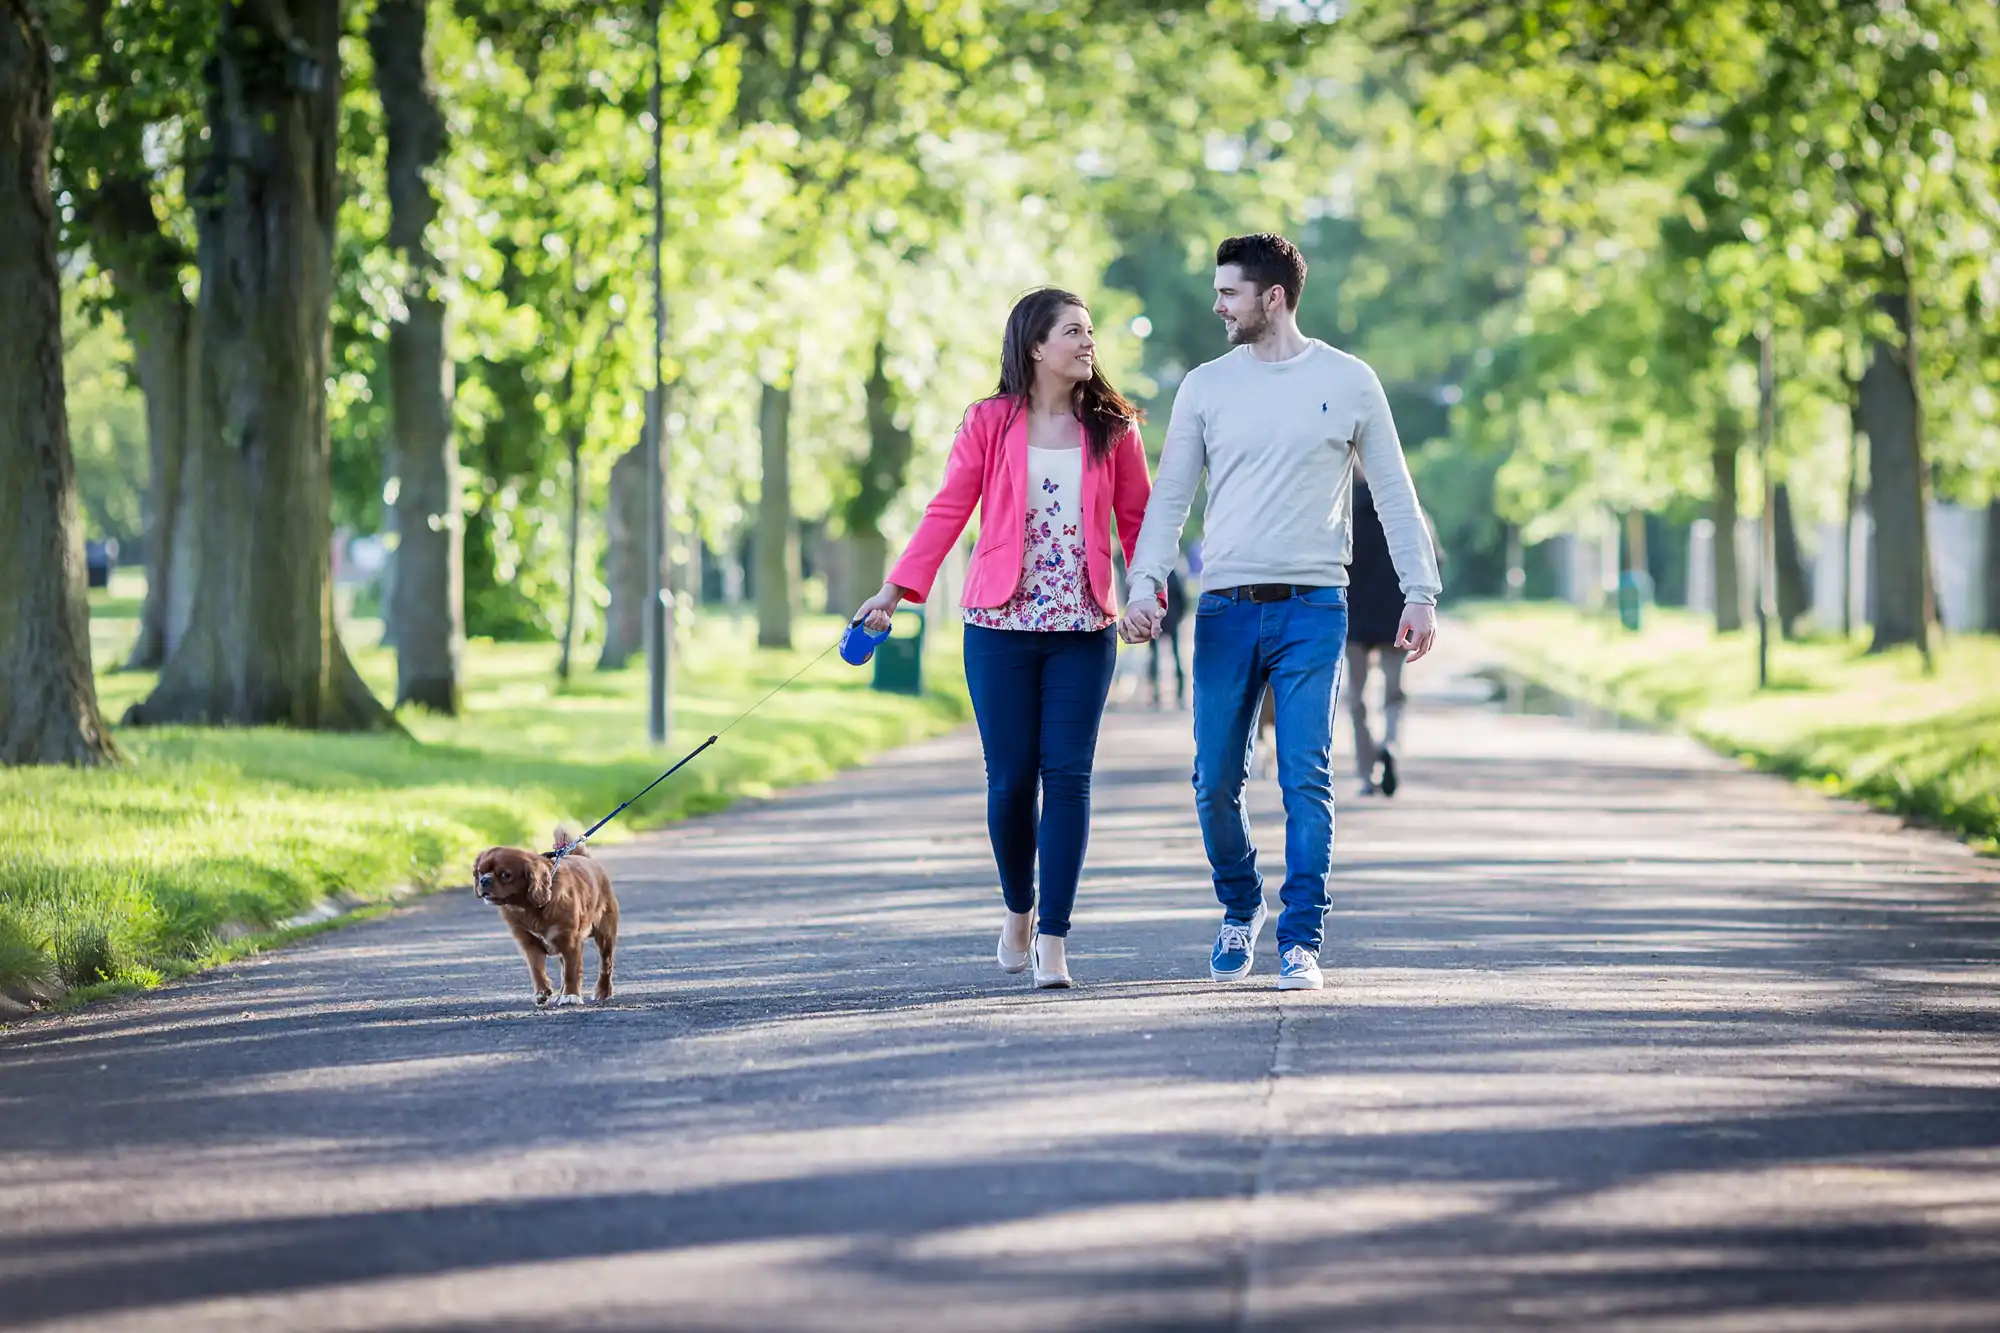 A couple walks hand in hand with a small dog on a leash along a tree-lined park path on a sunny day.